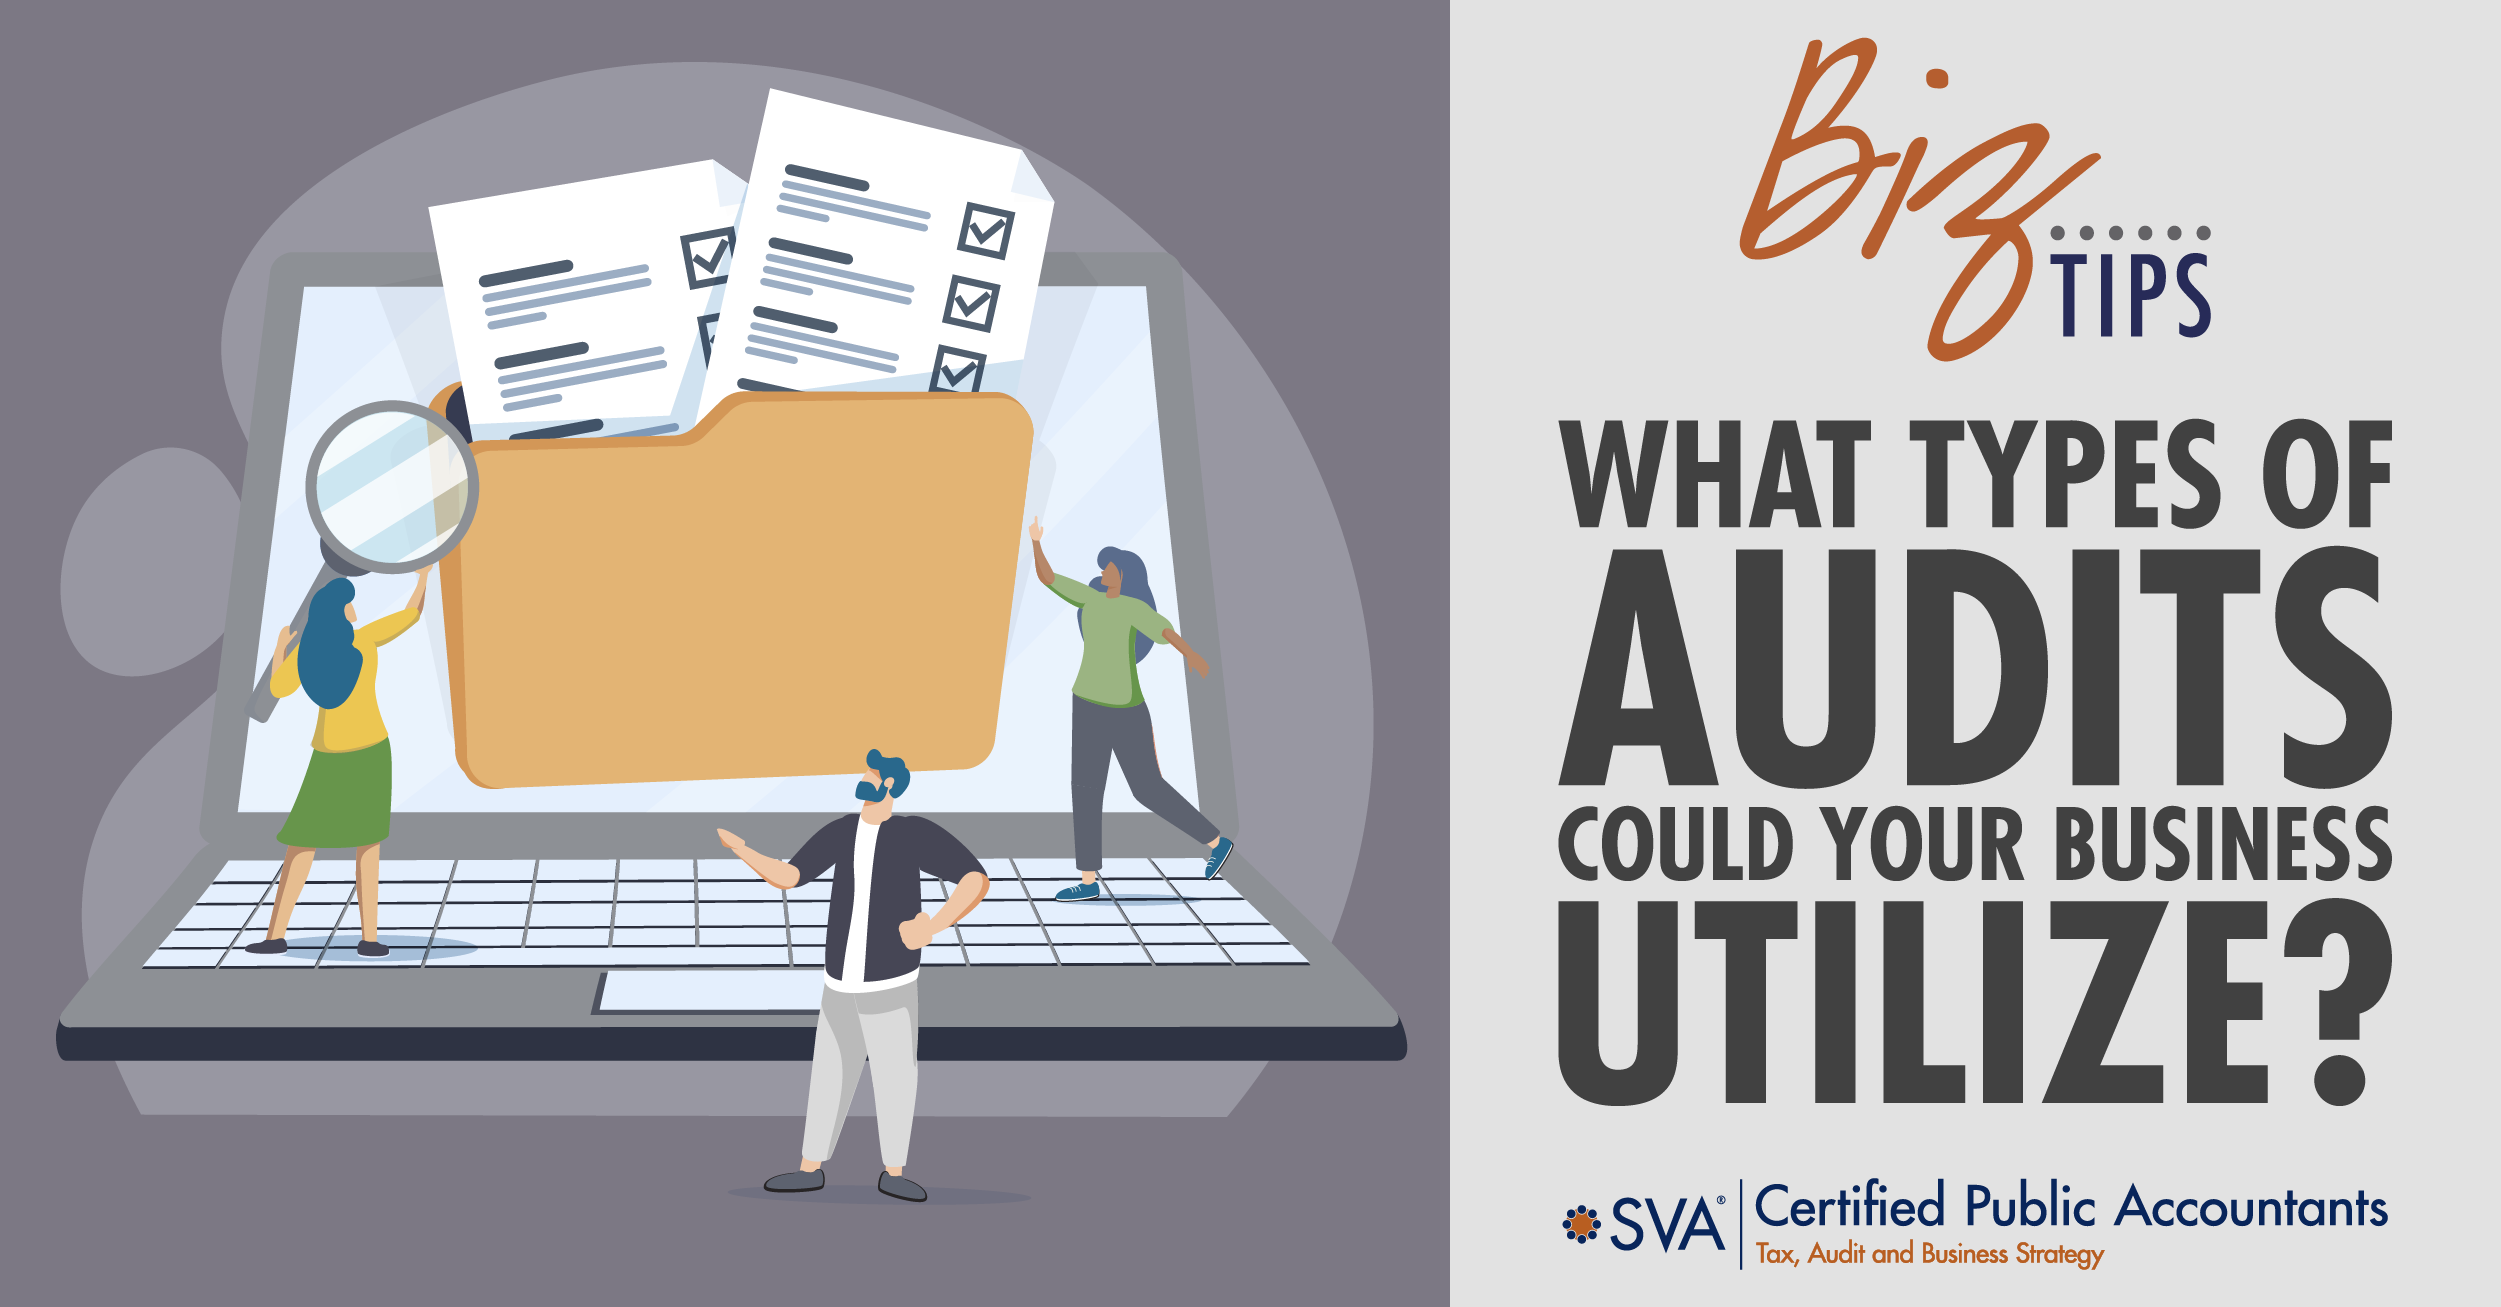 sva-certified-public-accountants-biz-tips-what-types-of-audits-could-your-business-utilize